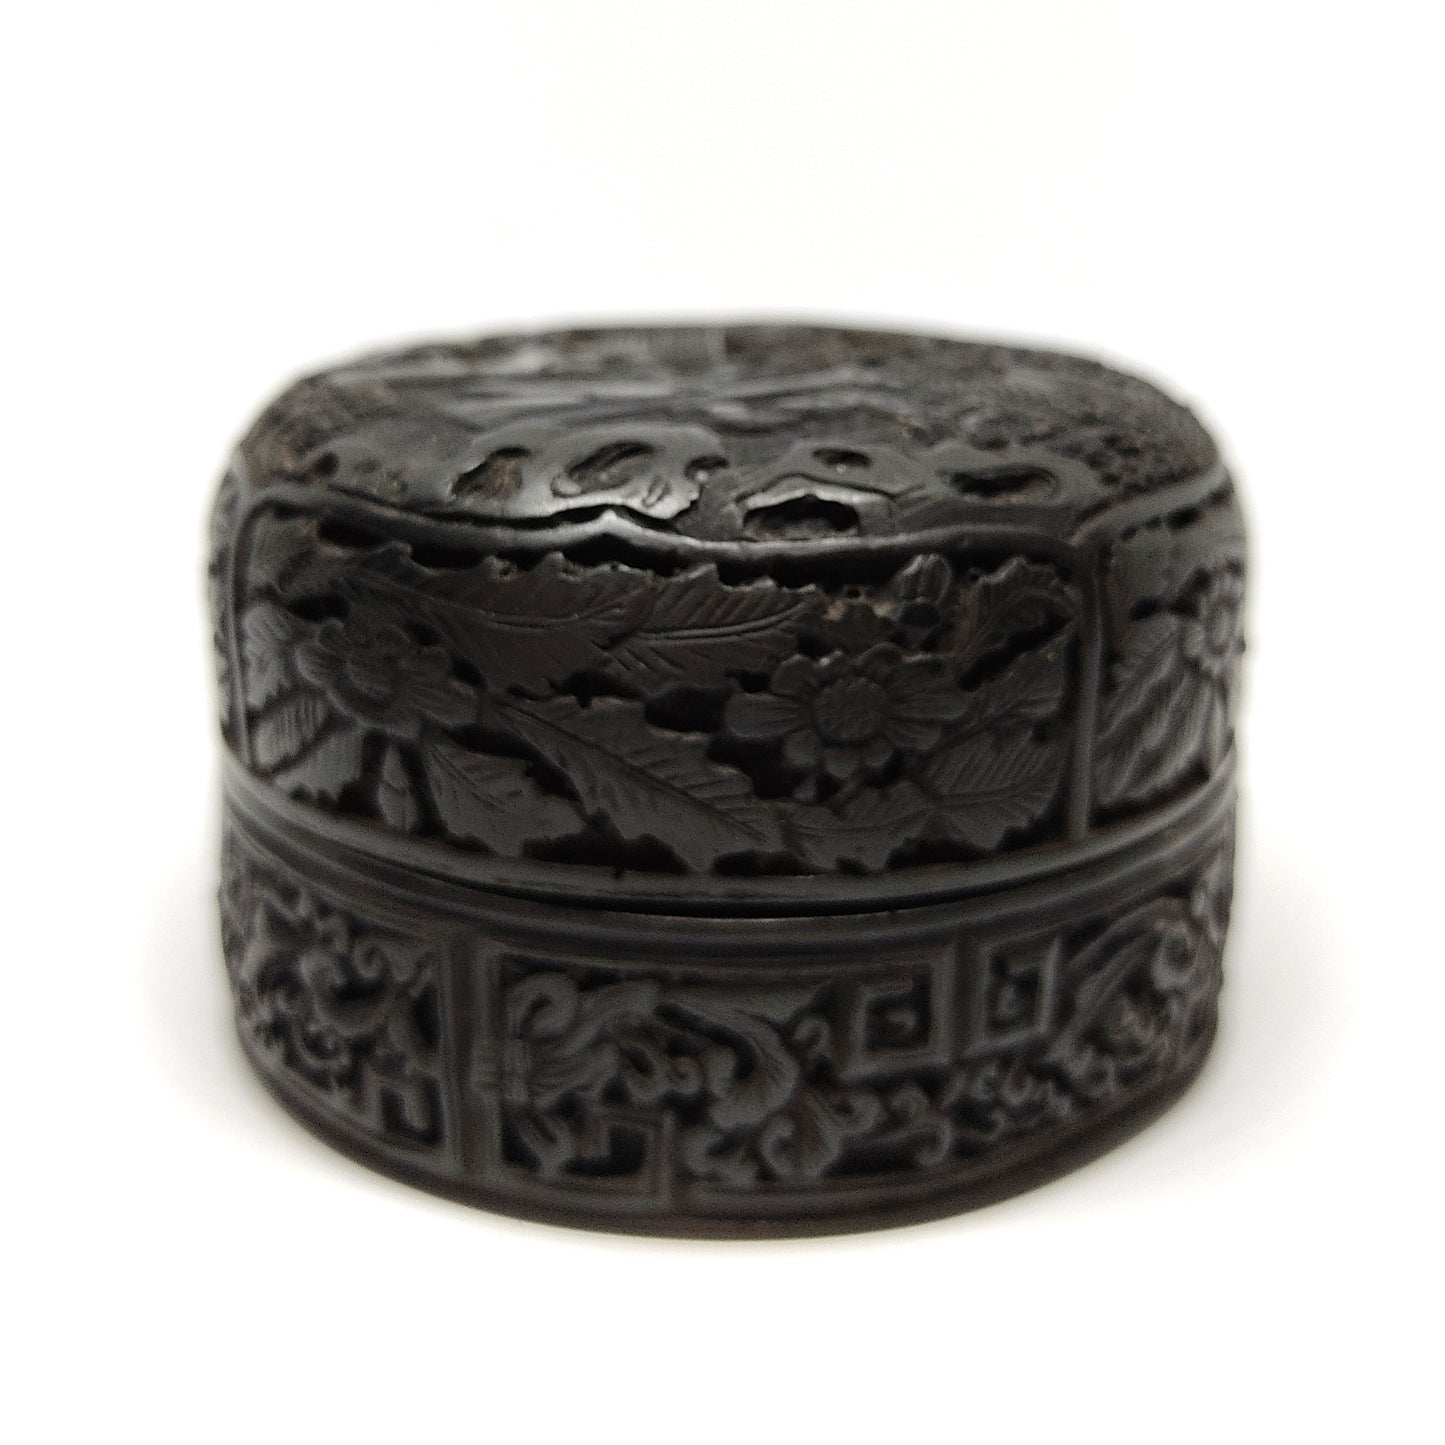 Black Wood Box With Lid Beautiful Carved Buddha Scenery Home Decoration 2.75"